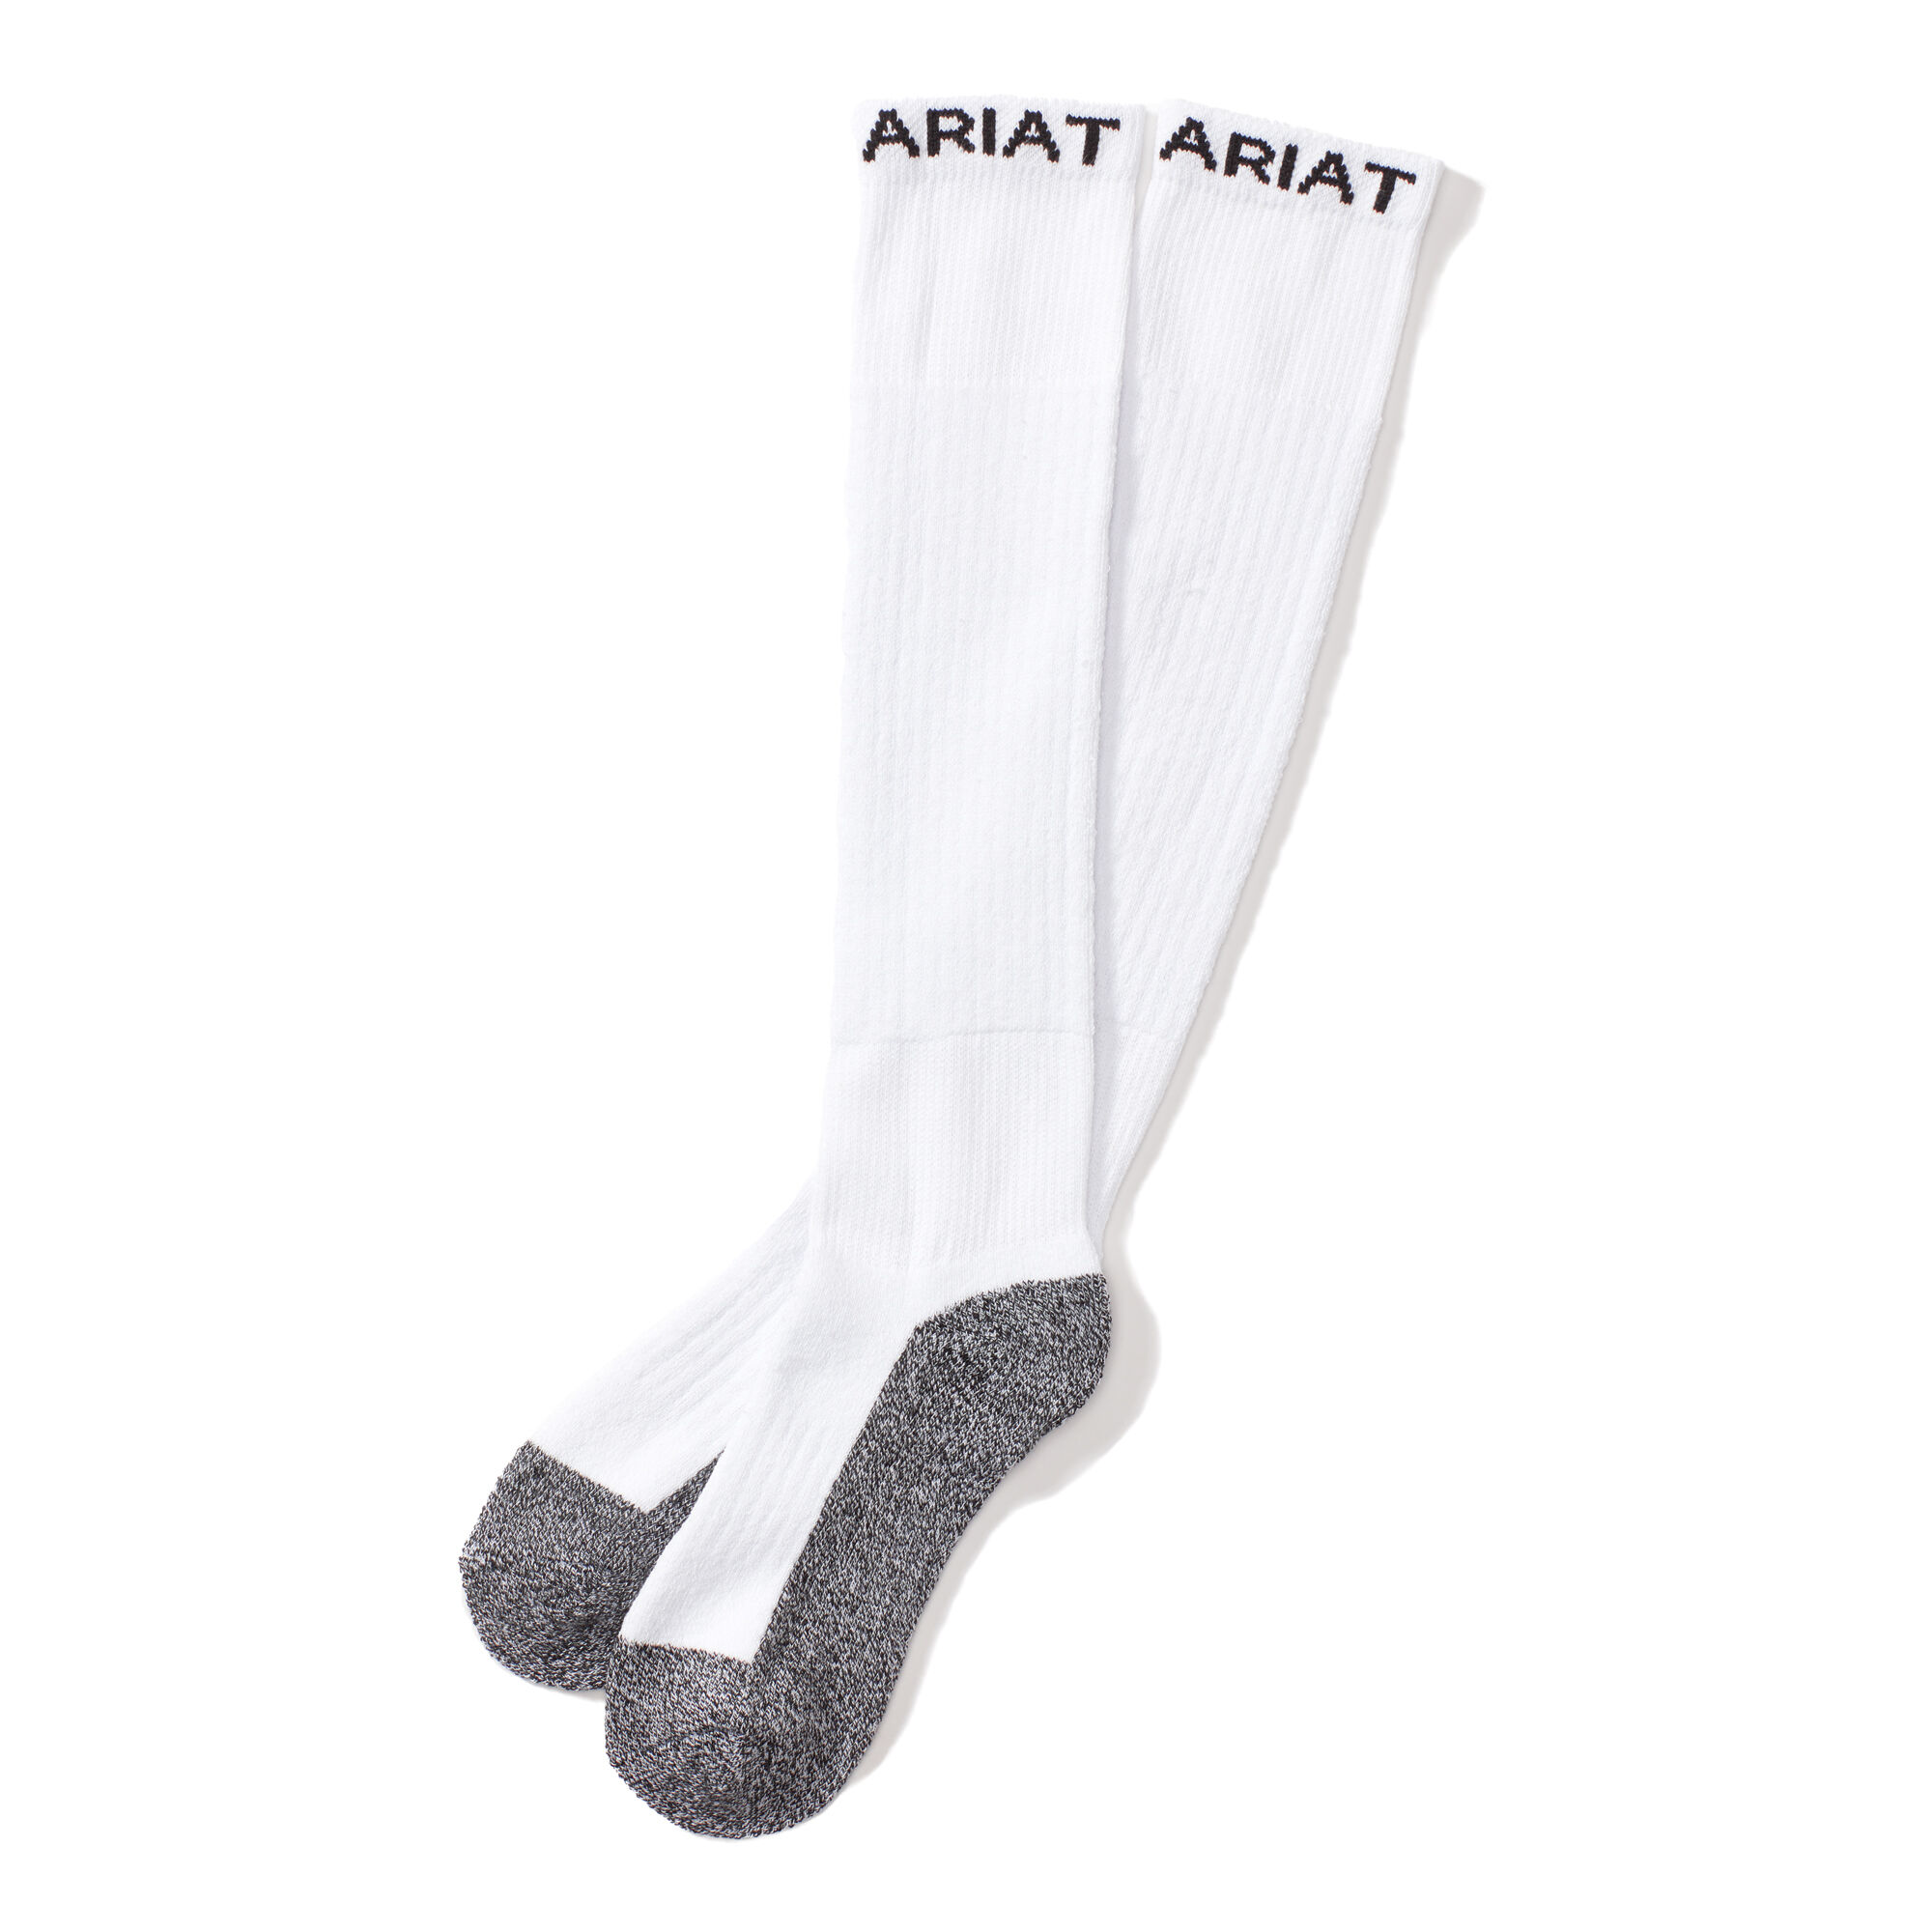 ariat over the calf boot socks